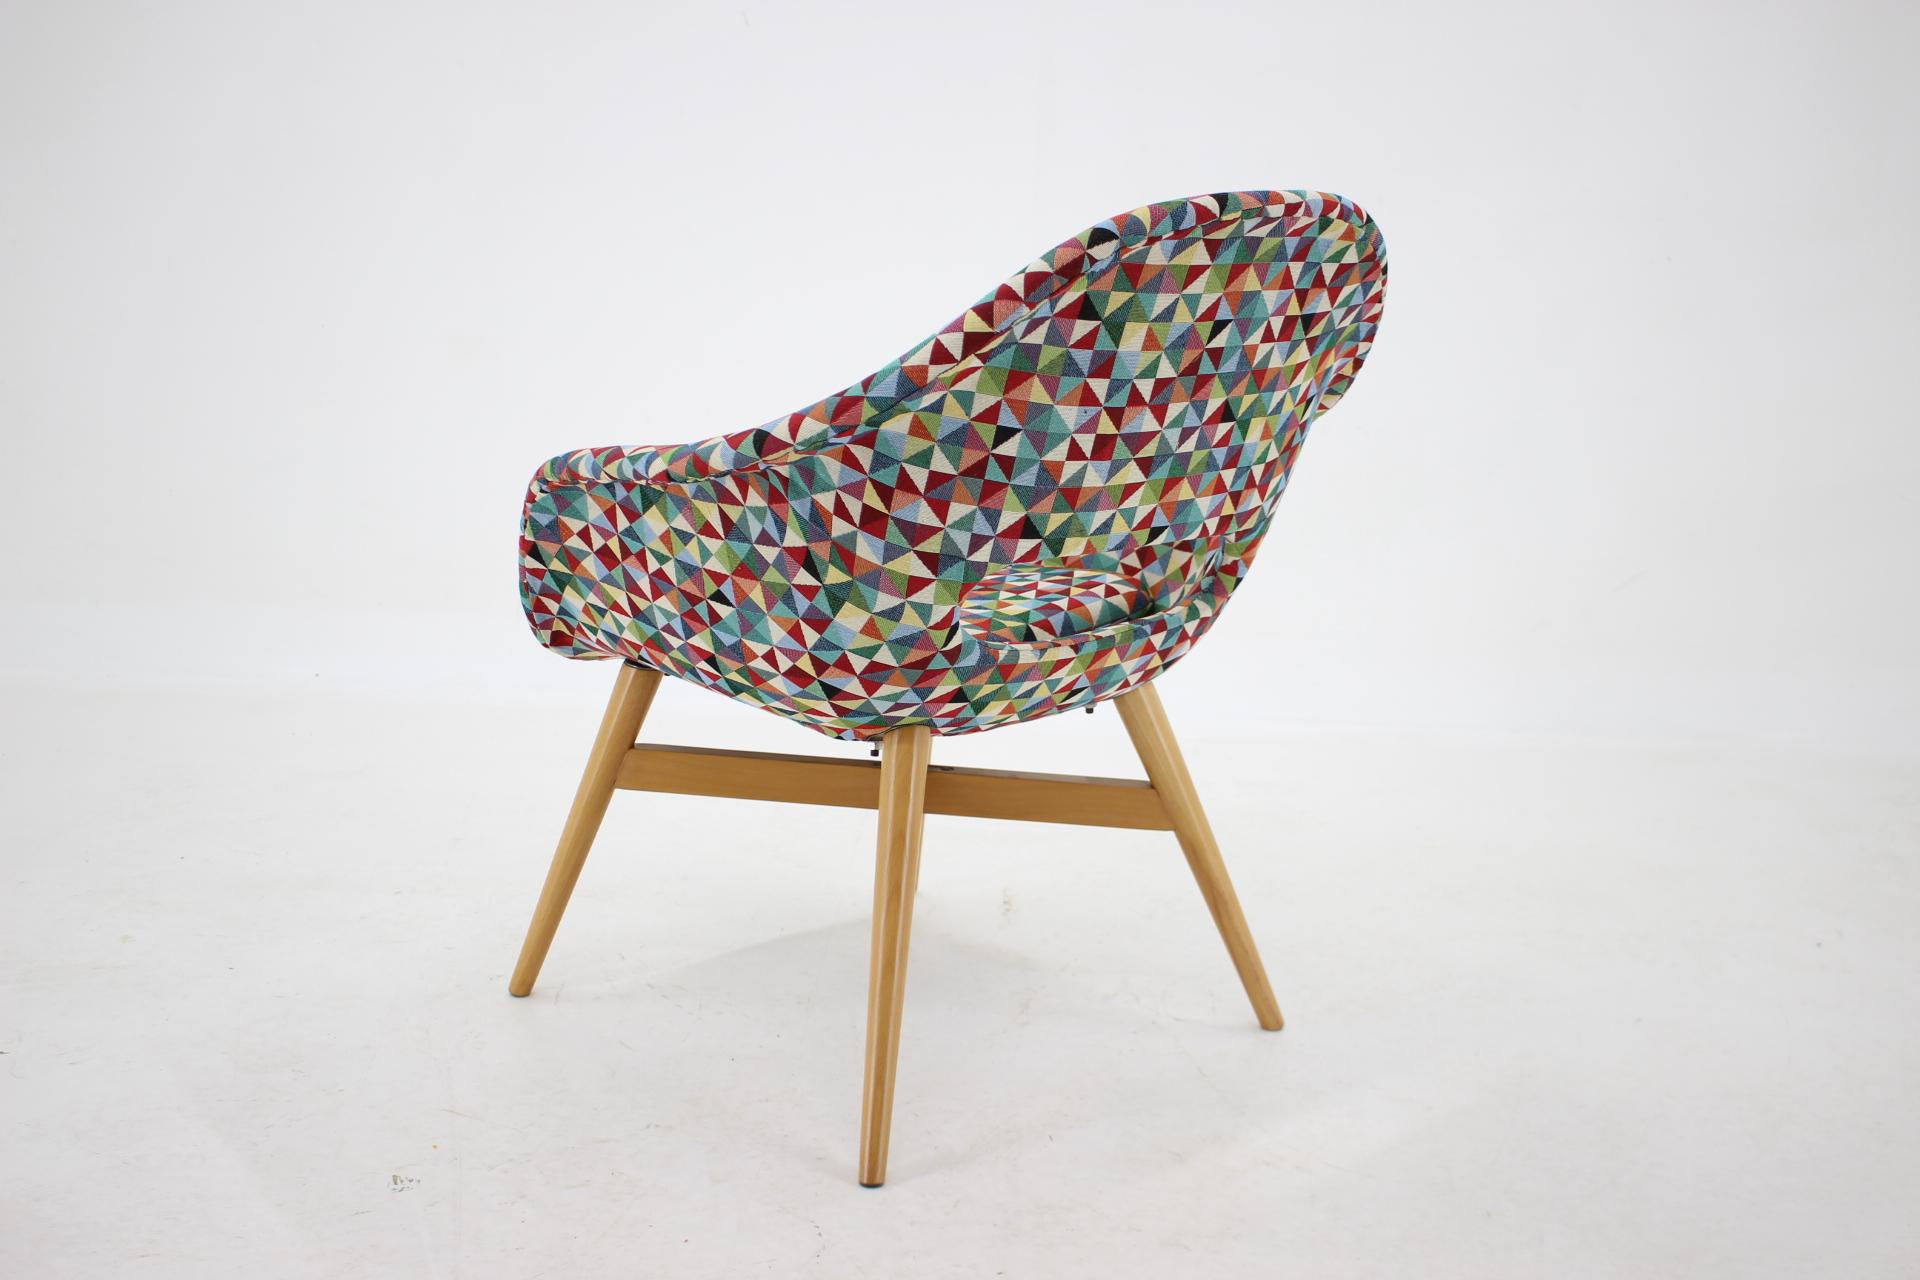 1960s Miroslav Navratil Shell Lounge Chair, Czechoslovakia In Good Condition For Sale In Praha, CZ